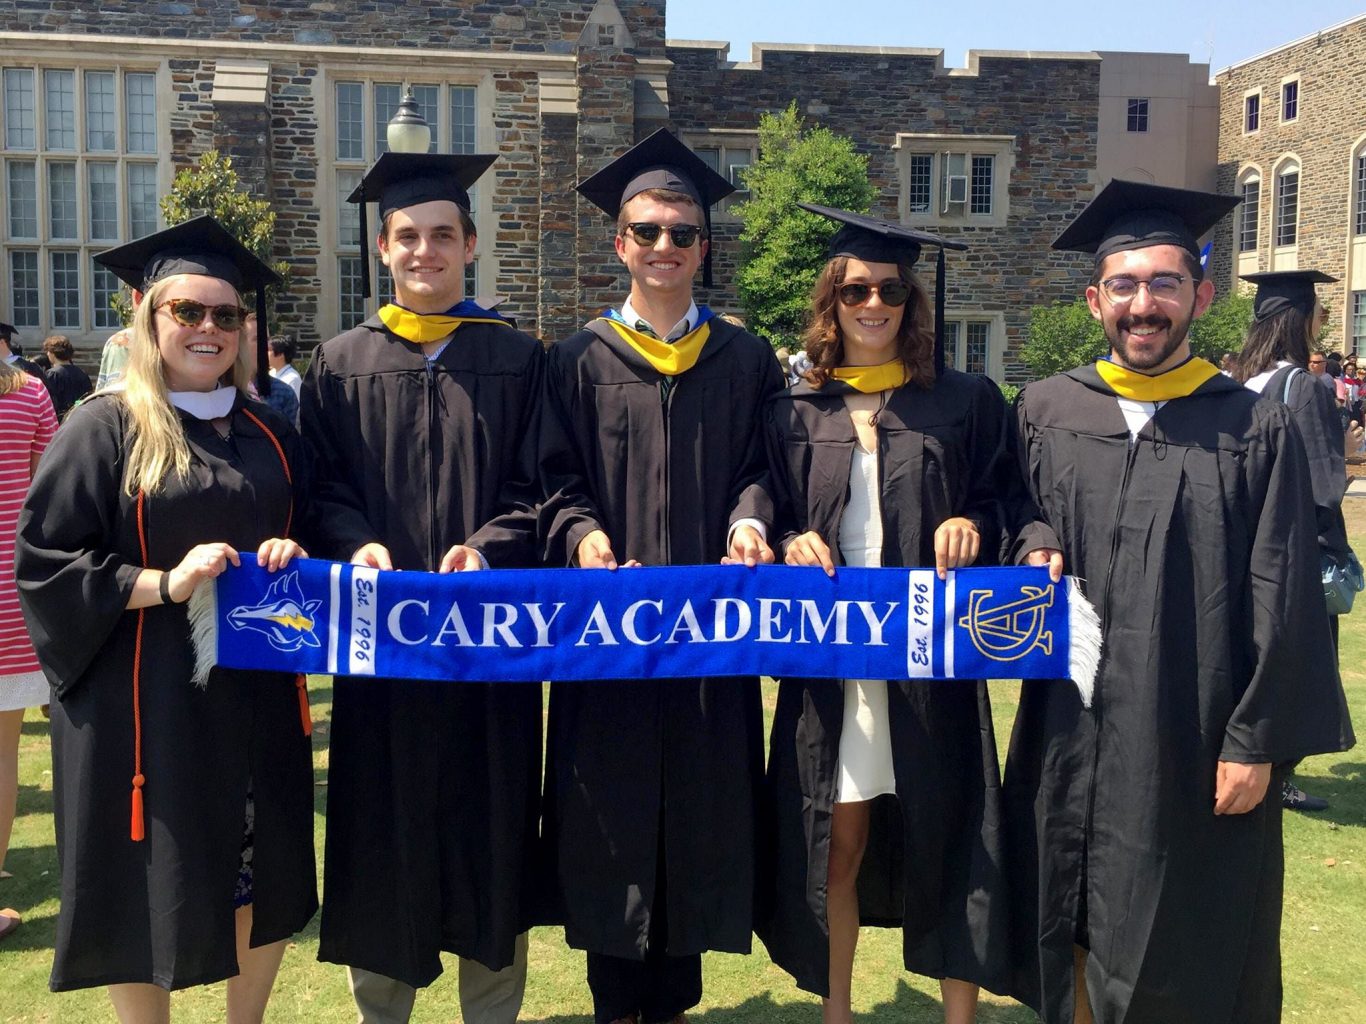 Cary Academy Private and Independent School in Cary NC